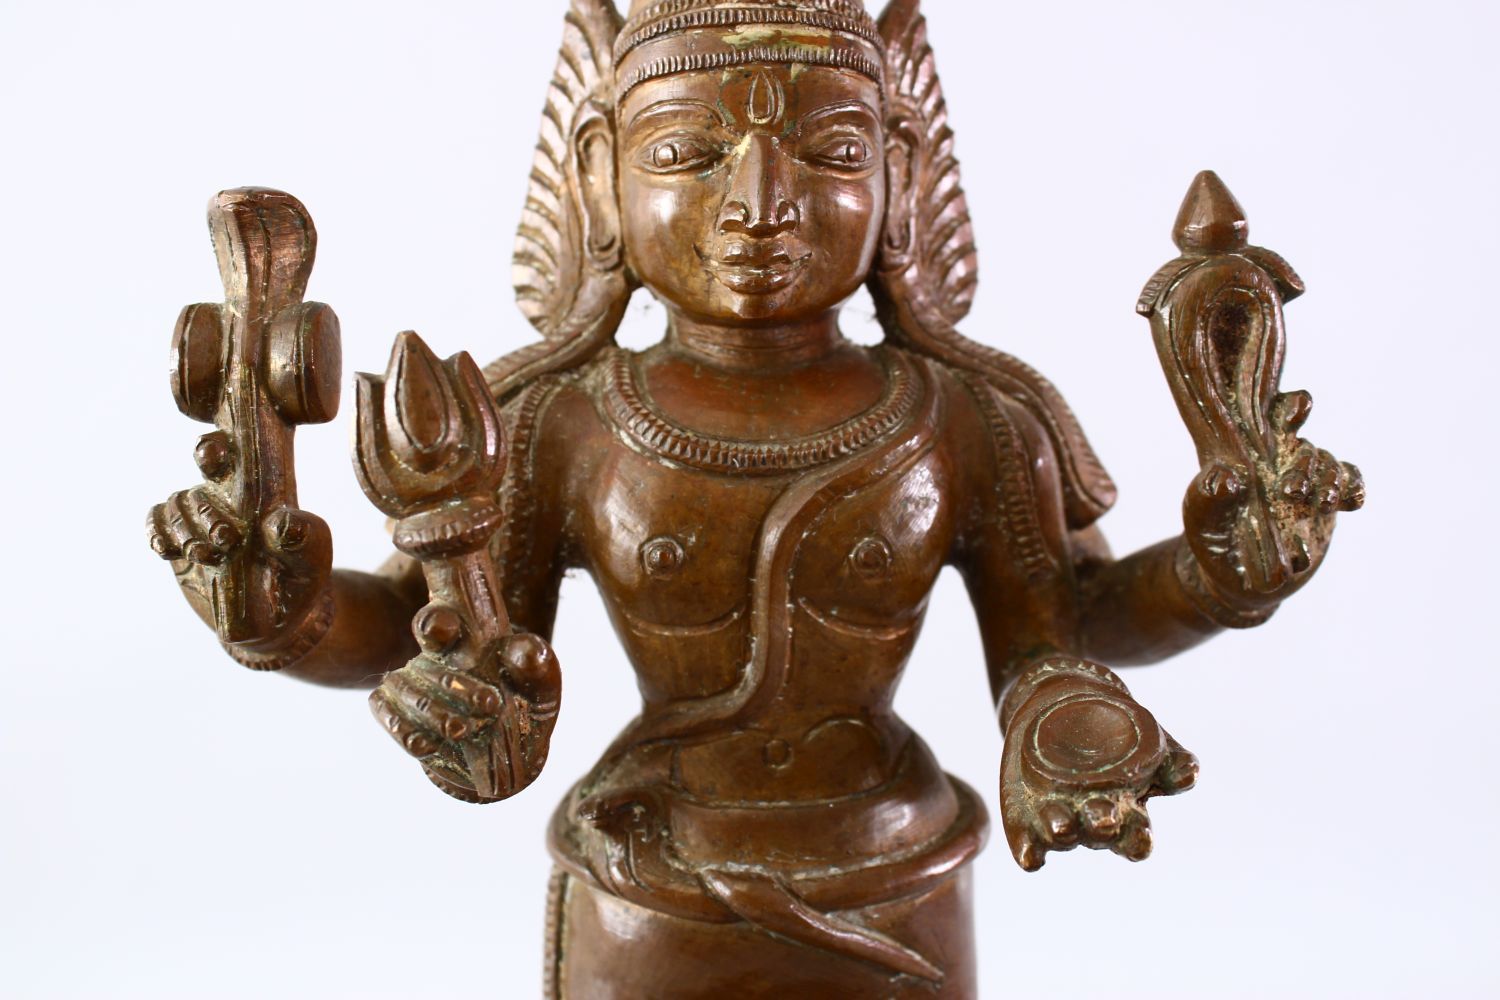 A LARGE INDIAN BRONZE FIGURE OF A HINIDU GOD, 43cm high. - Image 6 of 7